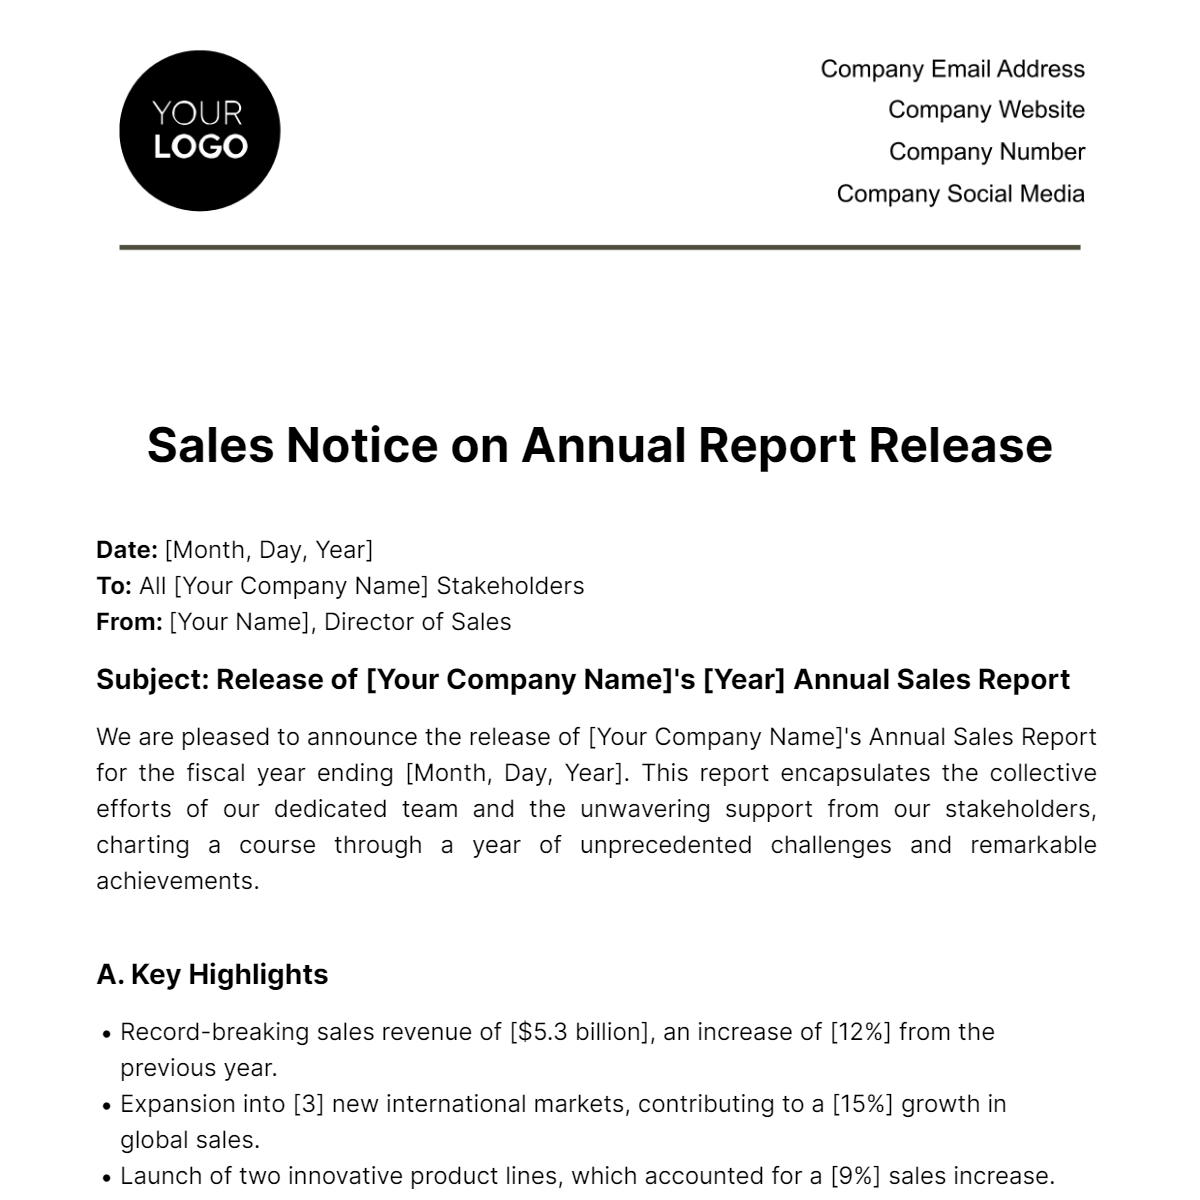 Sales Notice on Annual Report Release Template